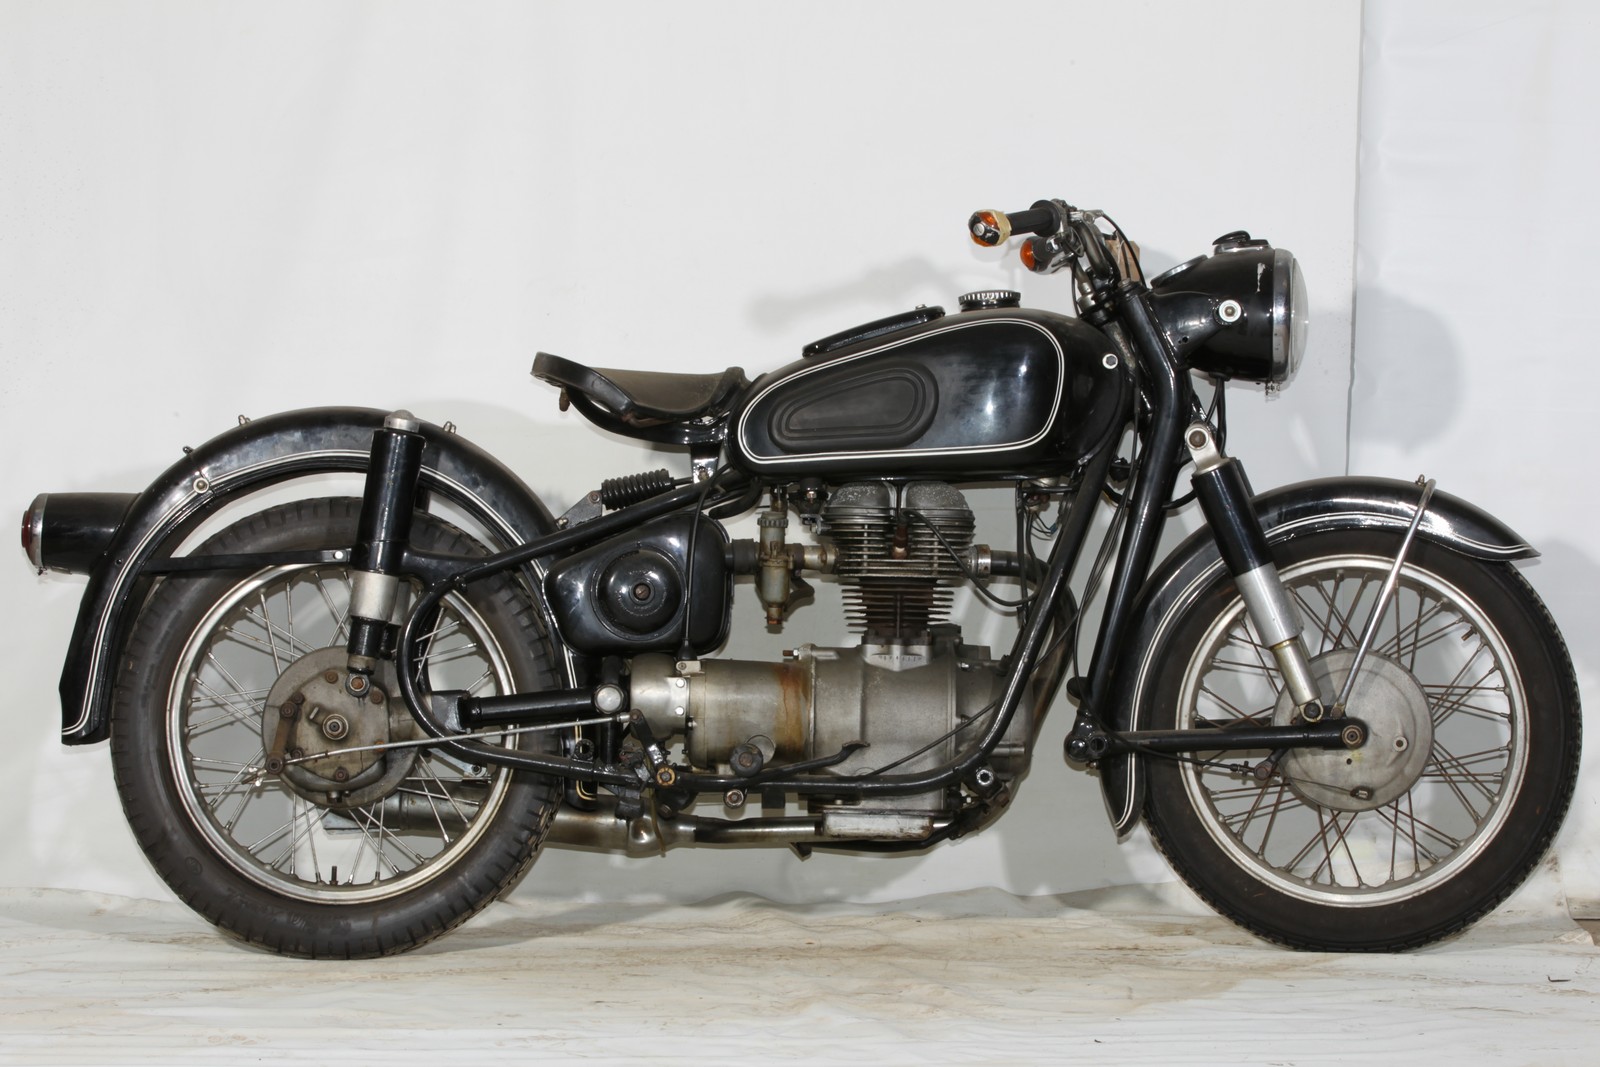 1960s BMW R27 247cc OHV Shaft Drive - Image 6 of 8